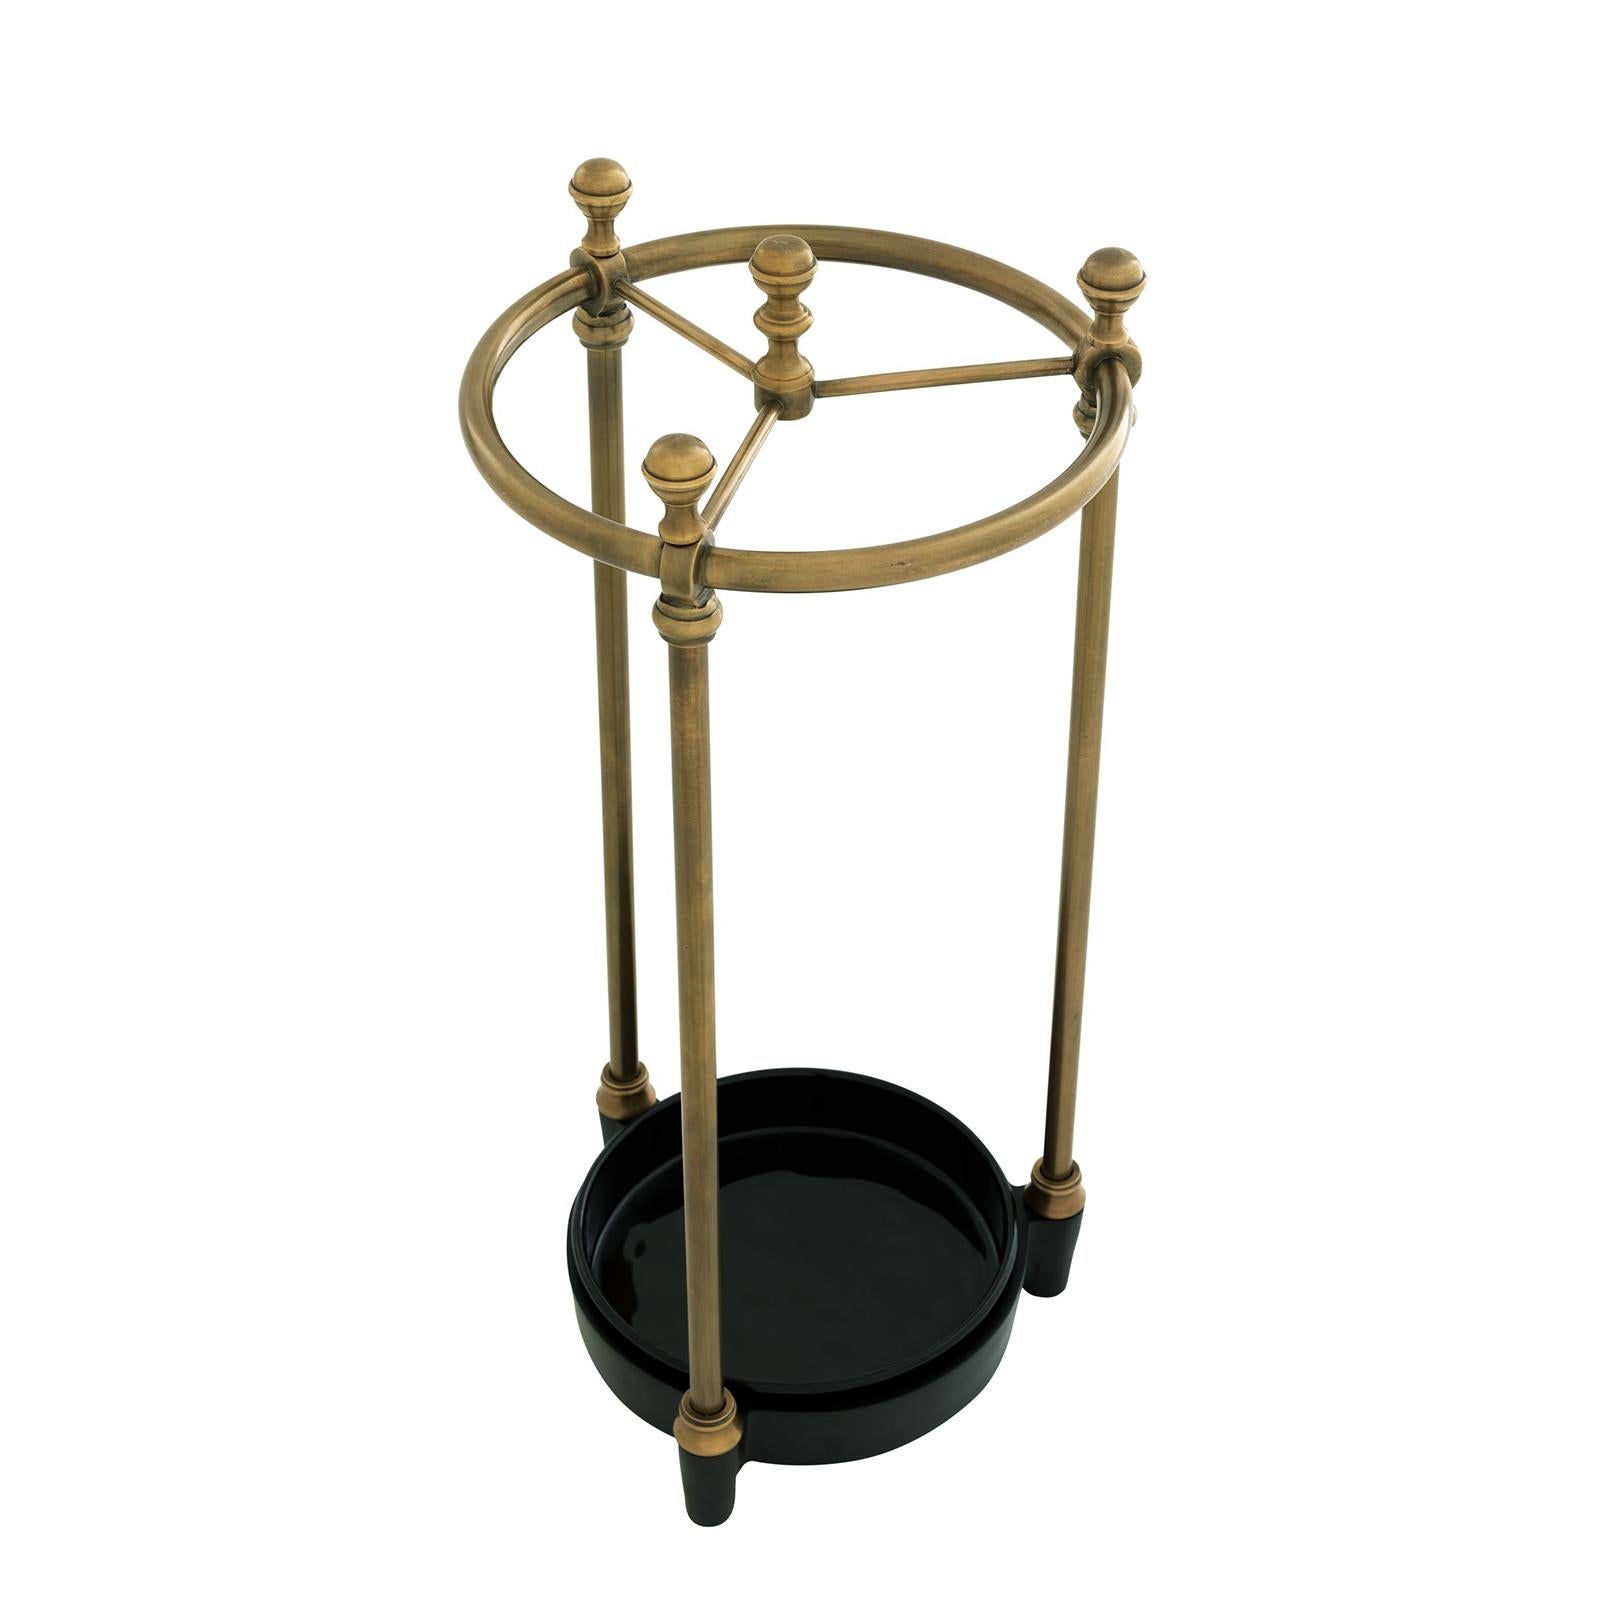 Umbrella stand rock brass with structure
in solid brass in antique finish, with black
ironed base.